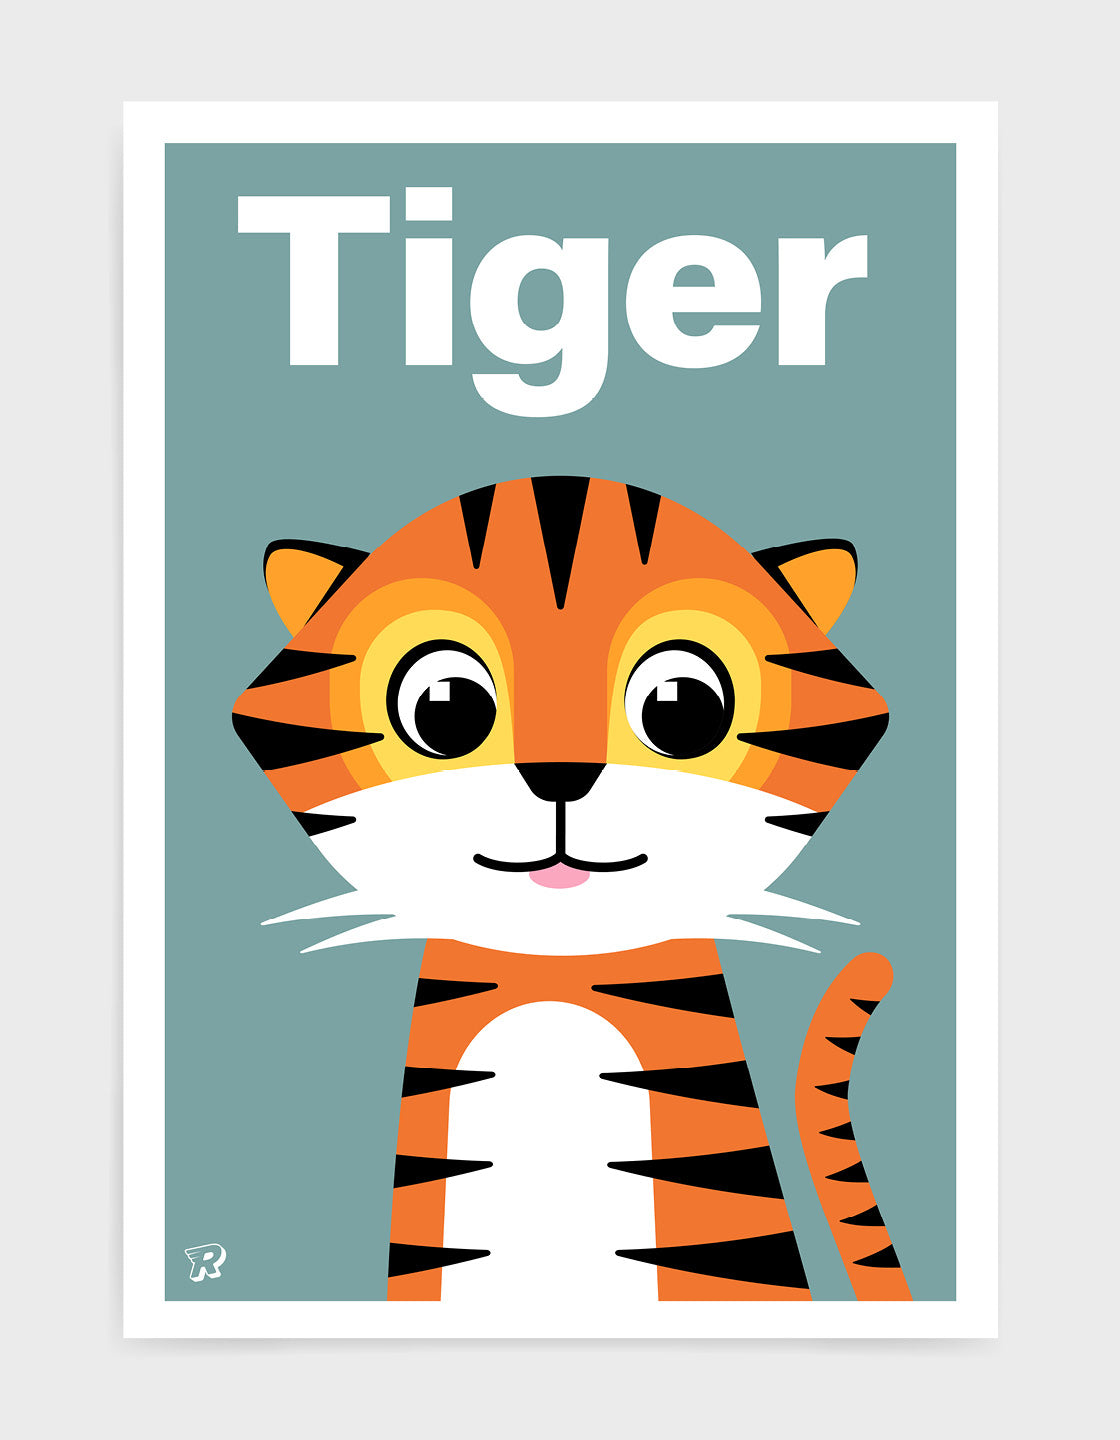 Cute kids tiger print with illustration of friendly tiger on a blue grey background. The word tiger is printed in white text above the tiger